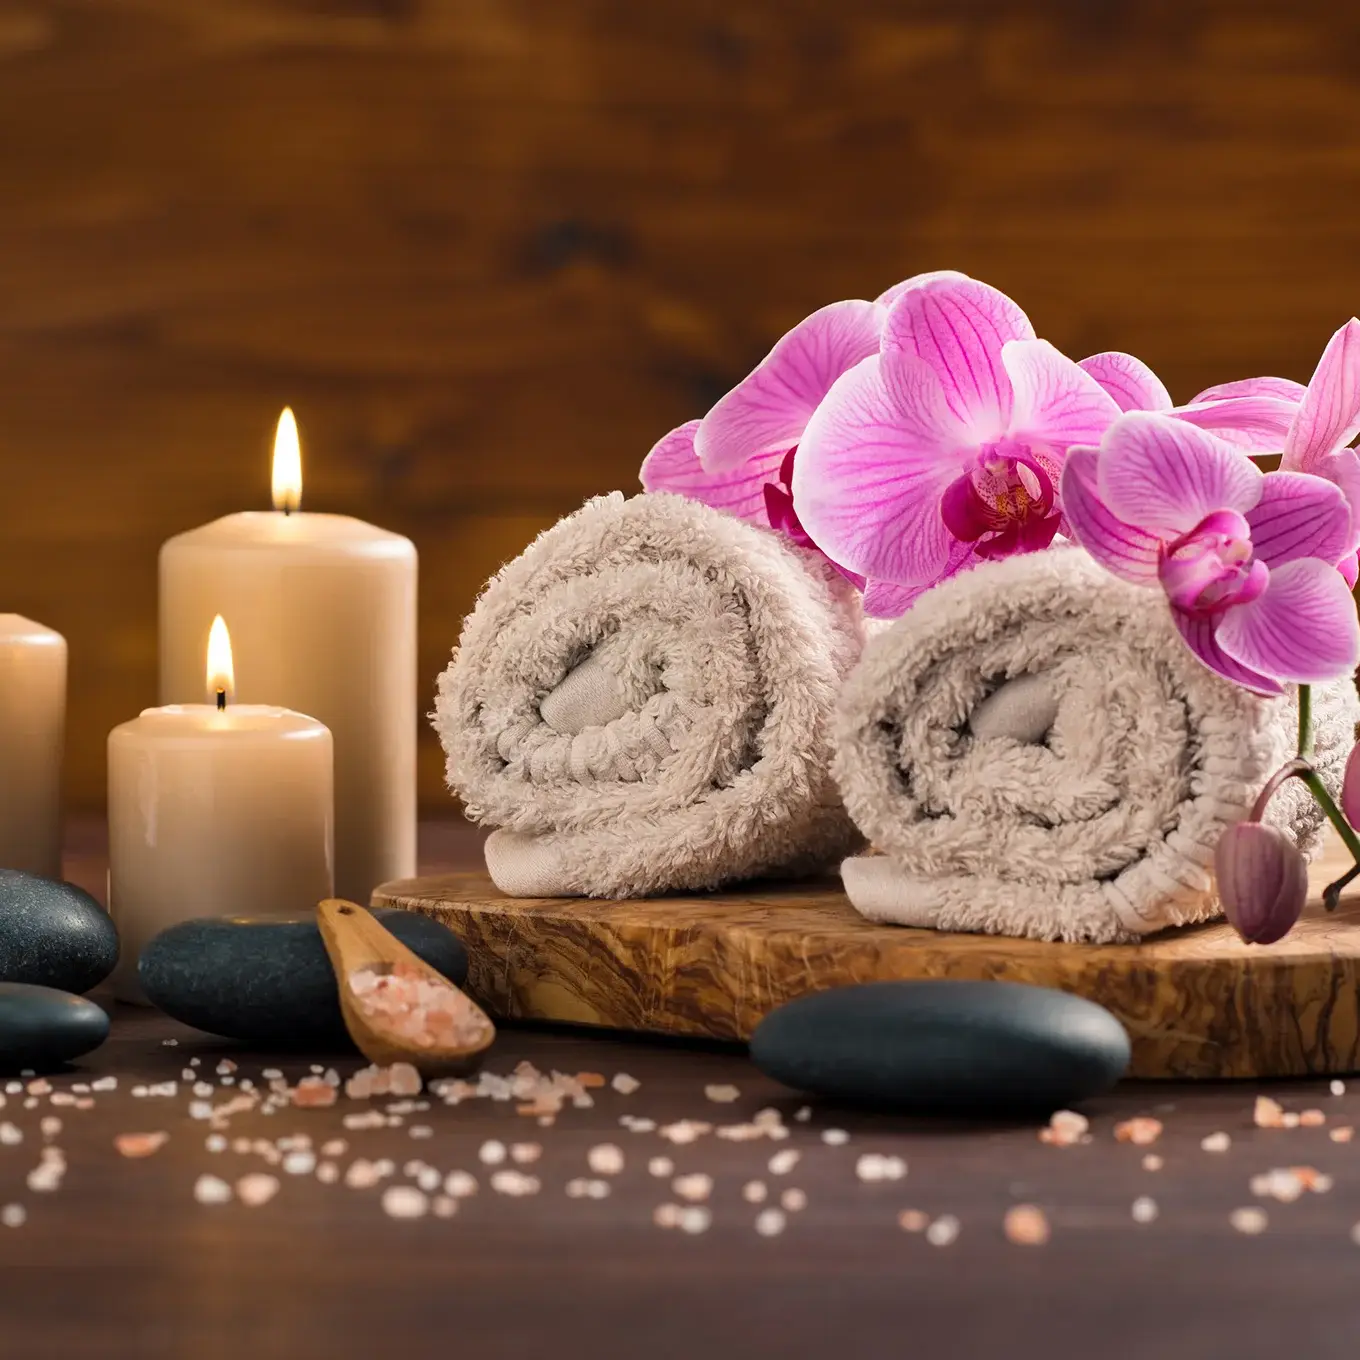 Complementary & Holistic Therapies and Life Coaching